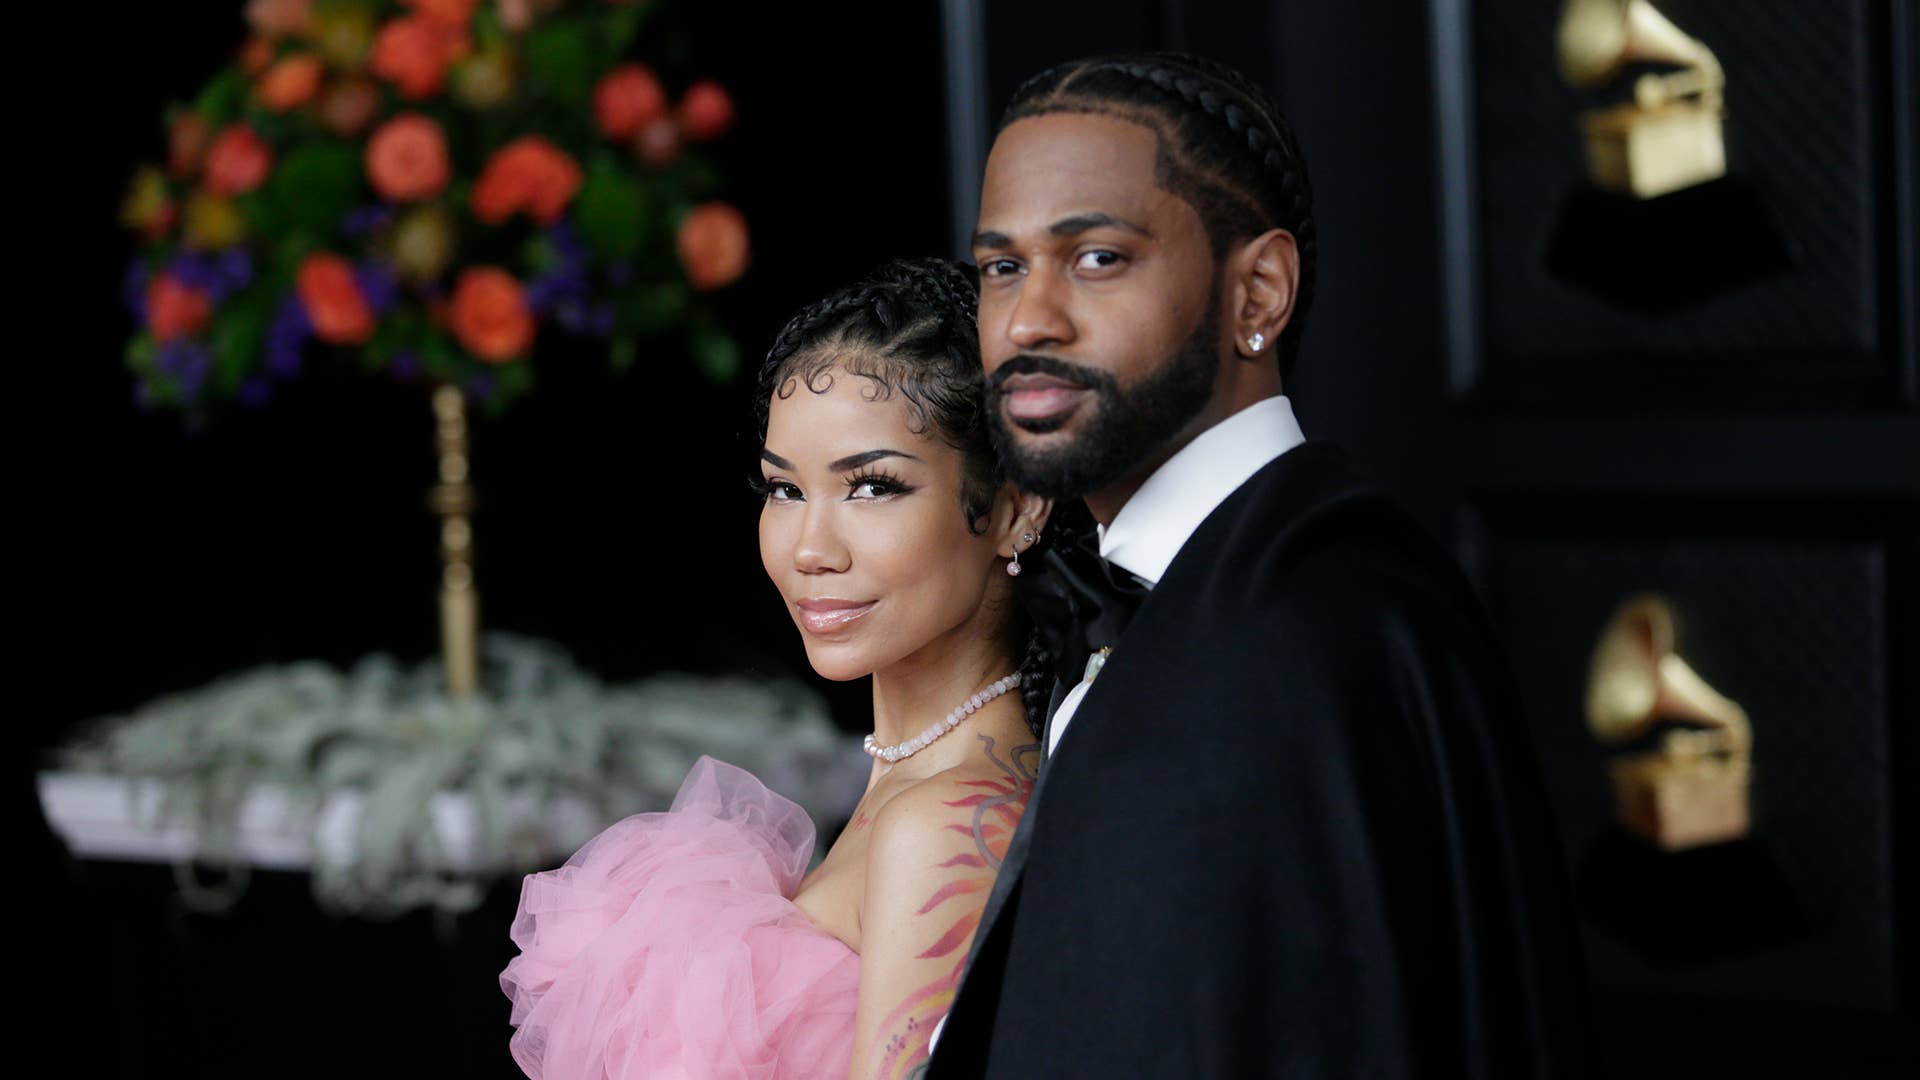 Jhene Aiko and Big Sean at THE 63rd ANNUAL GRAMMY® AWARDS